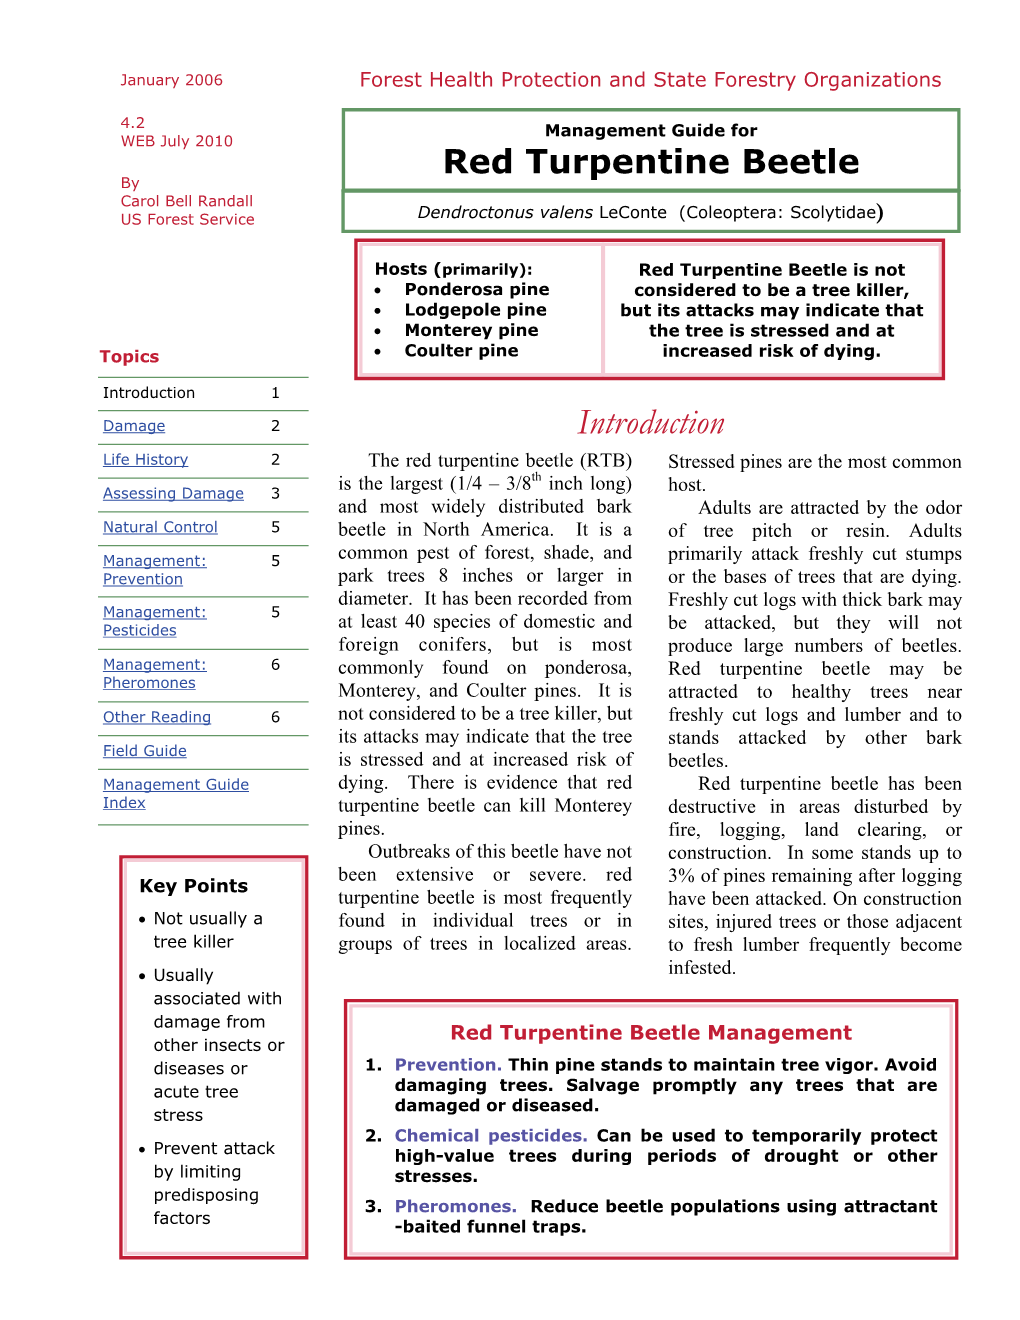 Red Turpentine Beetle by Carol Bell Randall US Forest Service Dendroctonus Valens Leconte (Coleoptera: Scolytidae)